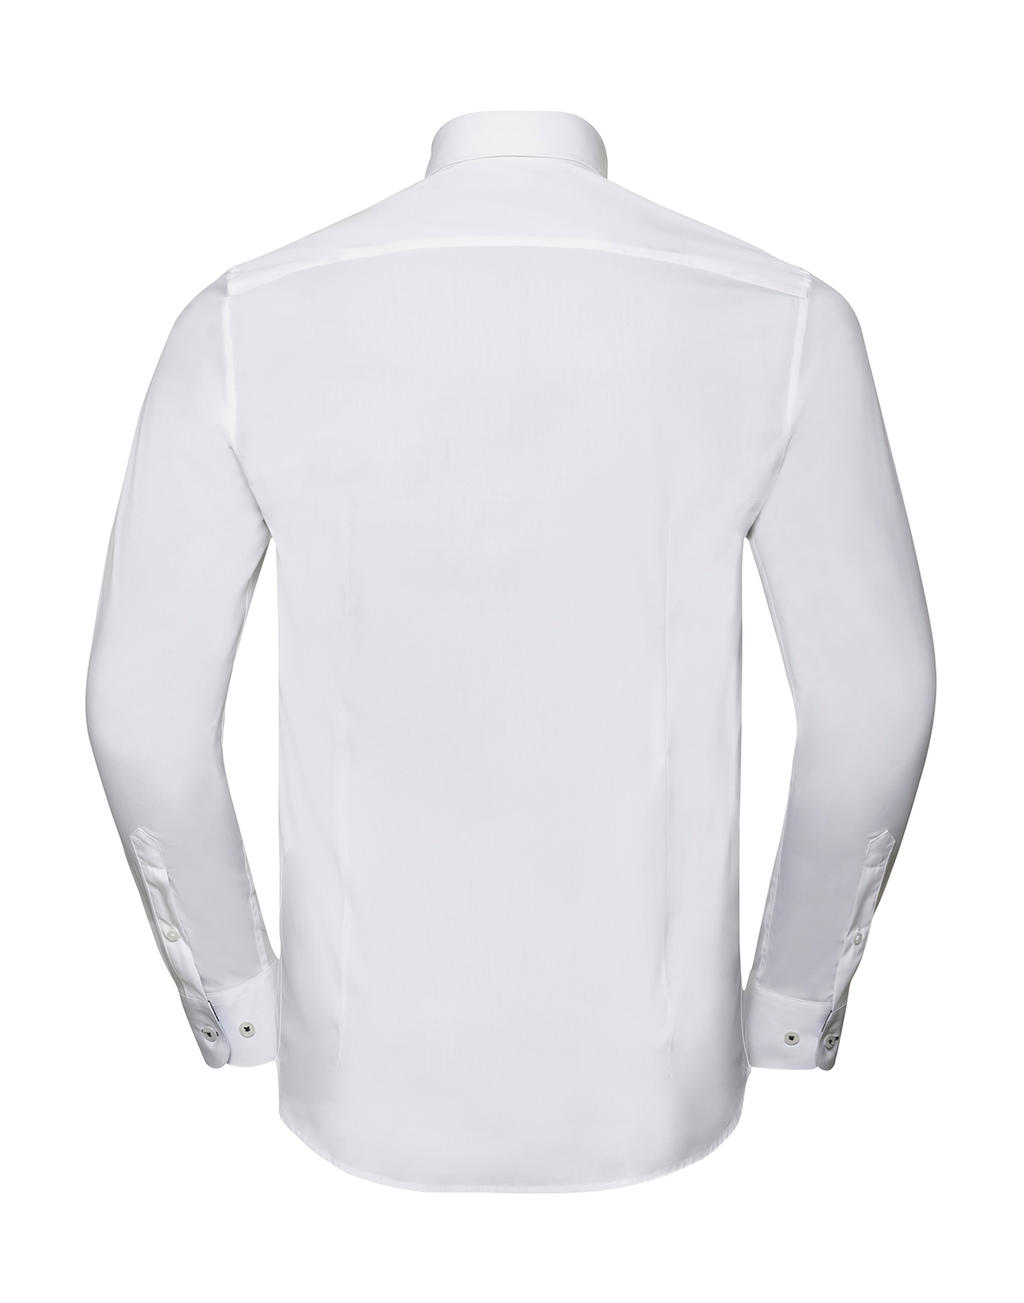  Mens LS Tailored Contrast Ultimate Stretch Shirt in Farbe White/Oxford Blue/Bright Navy